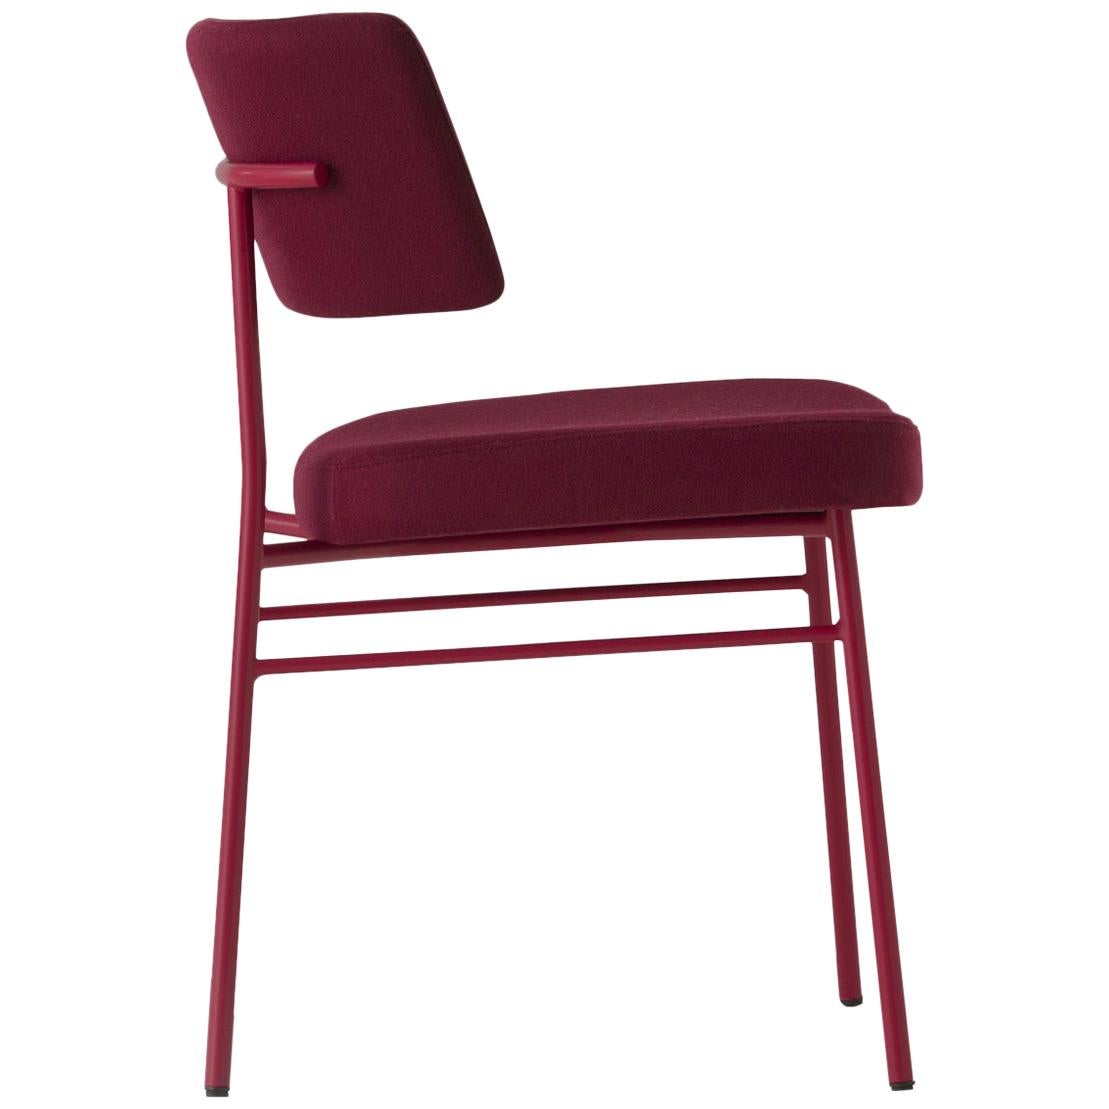 Marlen Chair, Red, Indoor, Chair, Made in Italy, Home, Contract